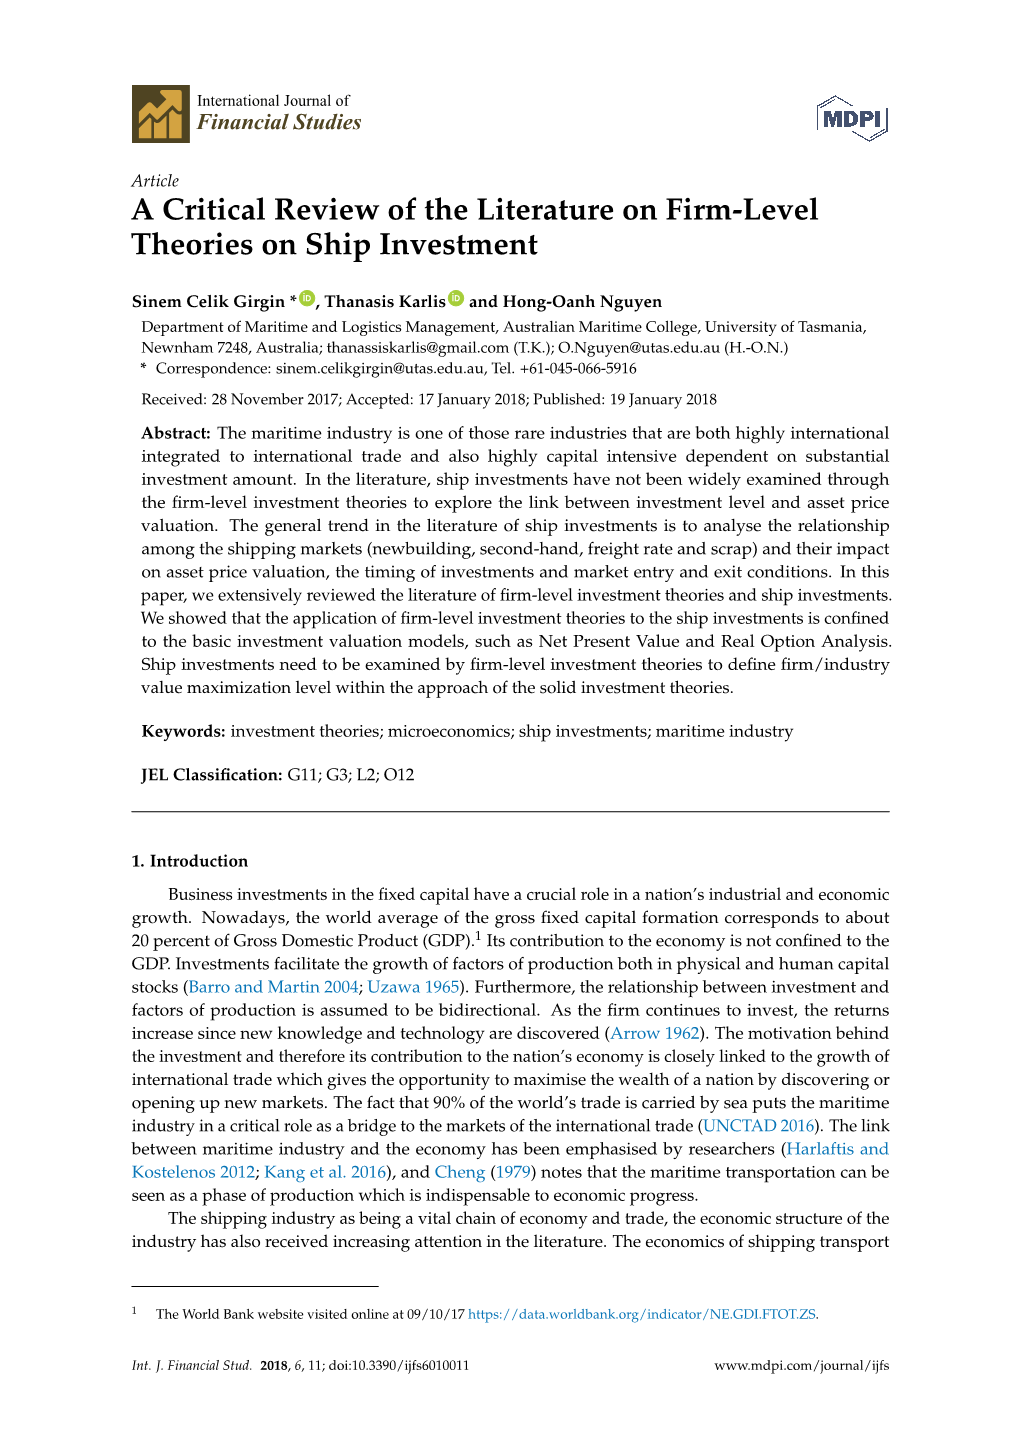 A Critical Review of the Literature on Firm-Level Theories on Ship Investment